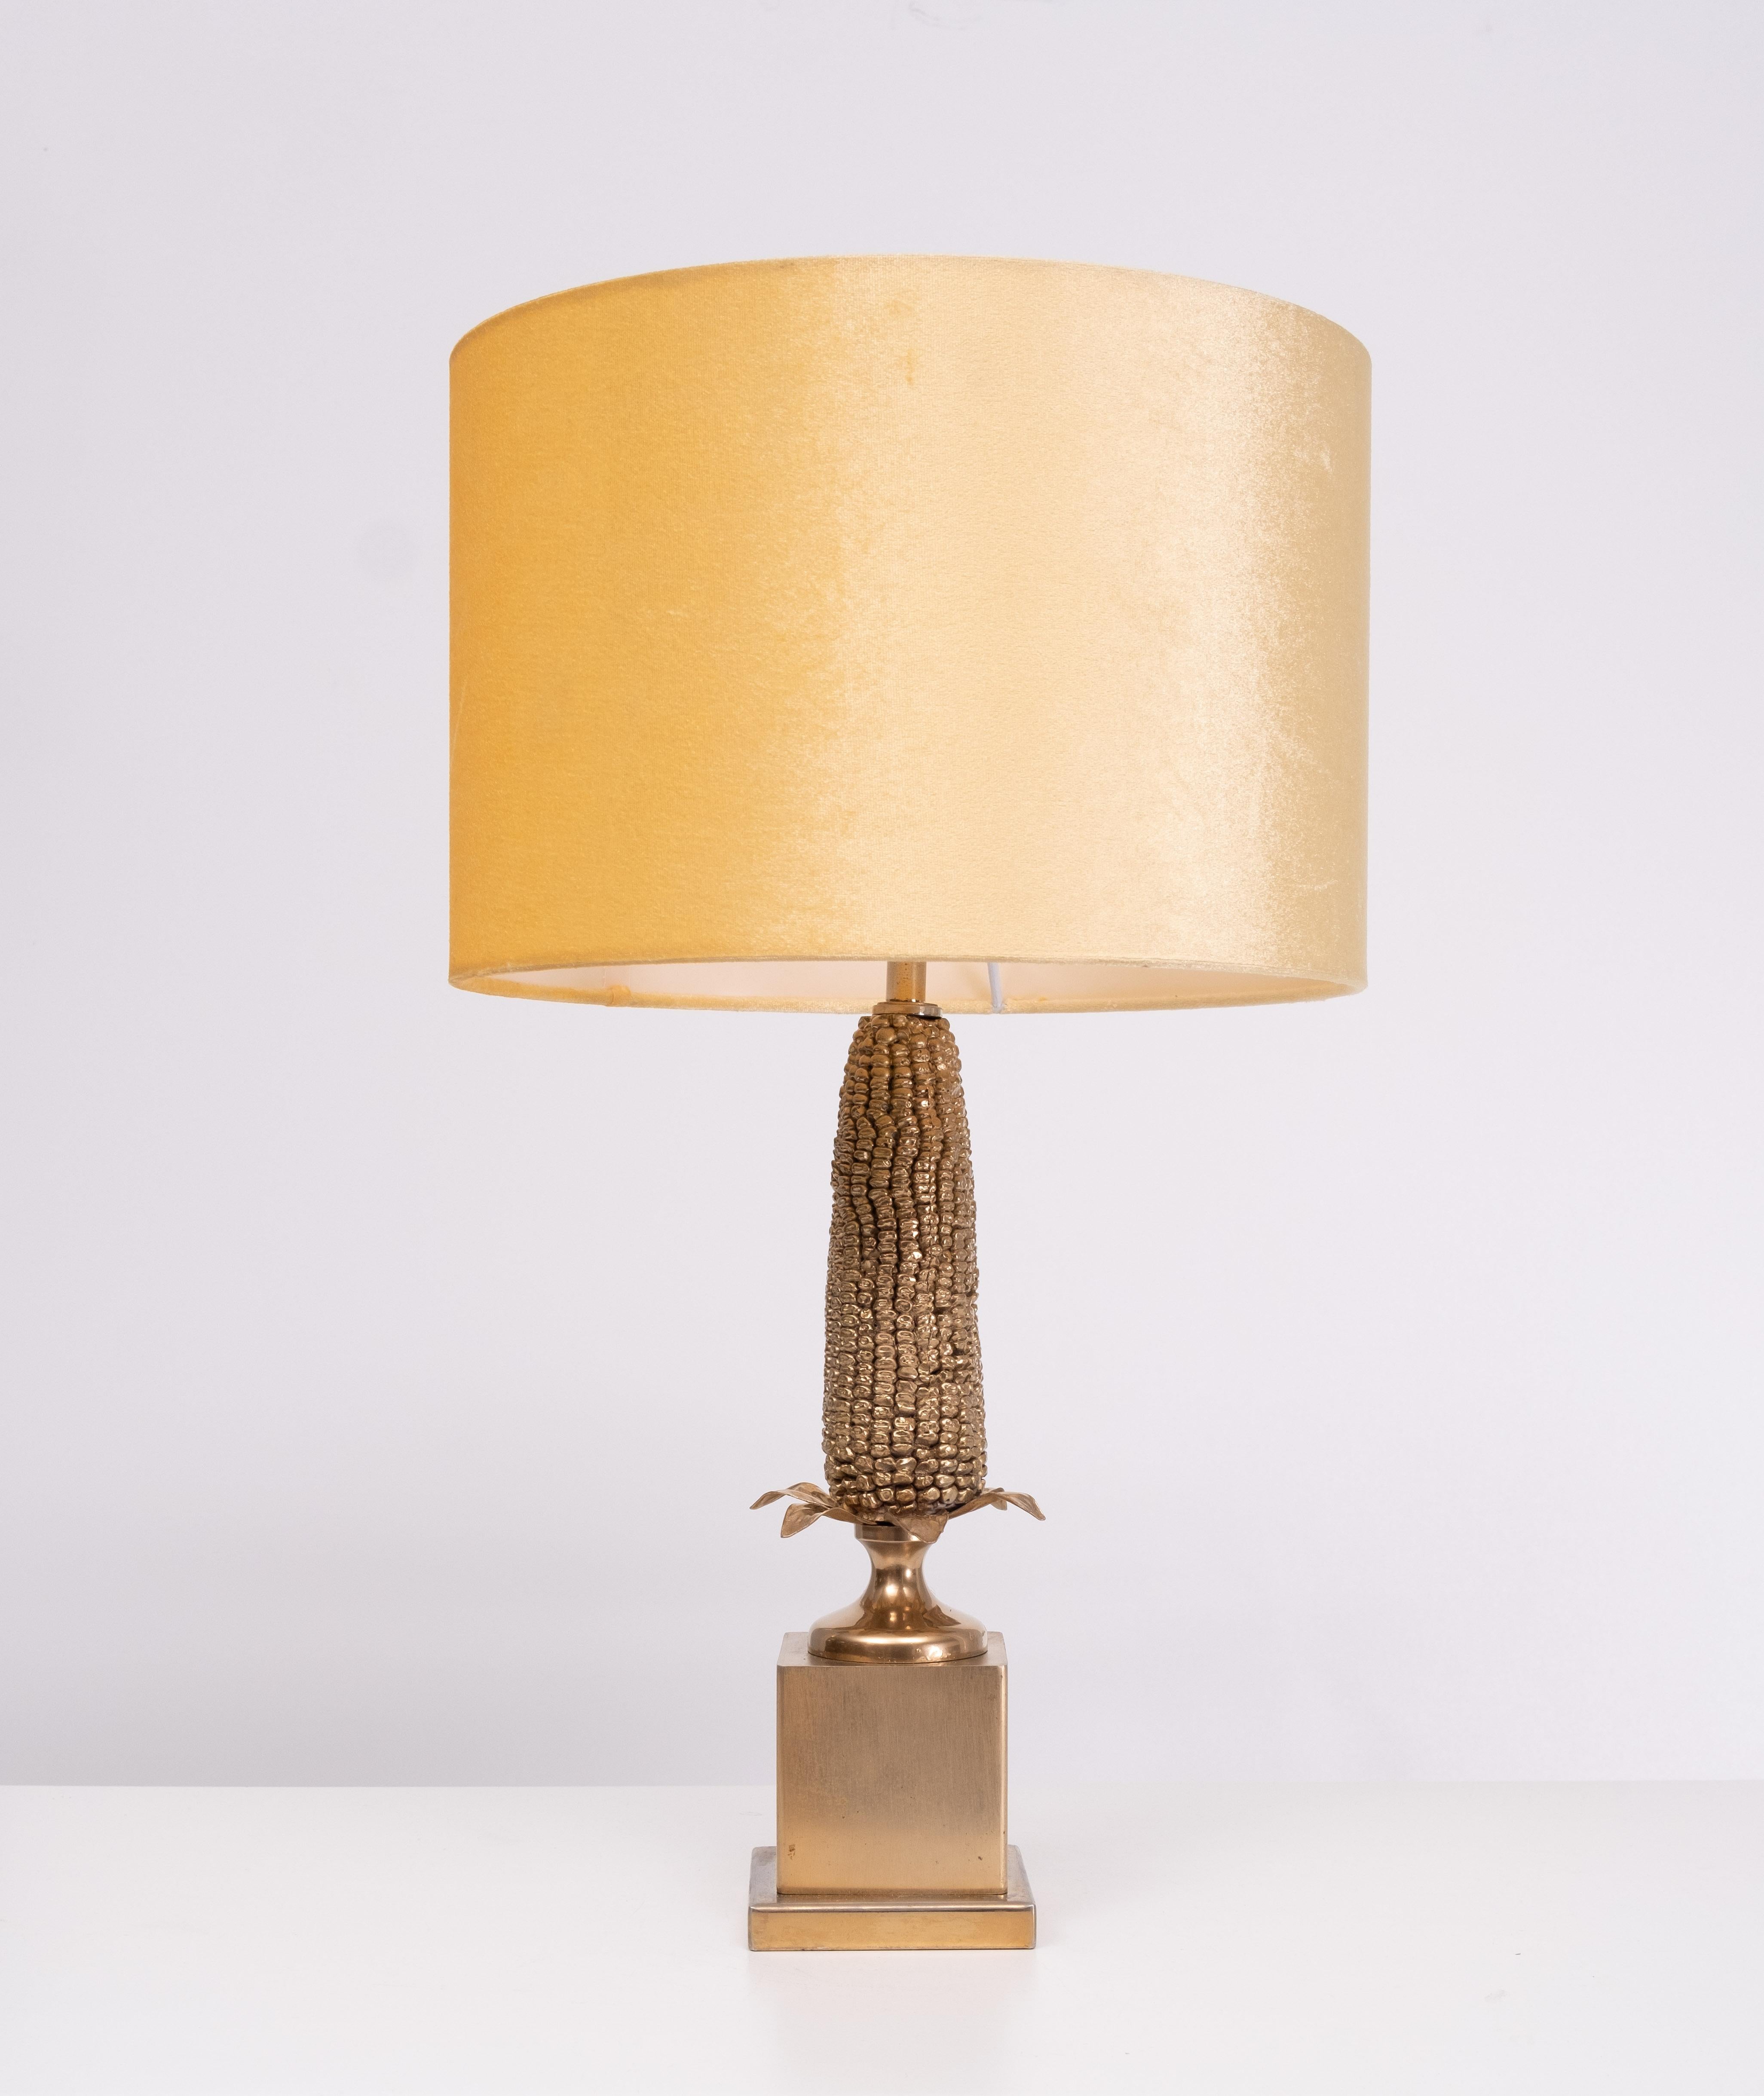 Maison Charles, France. Table lamp designed as a corn cob with base and brass leaves. 1960s / 70s. Comes with a new Velvet Gold color shade.